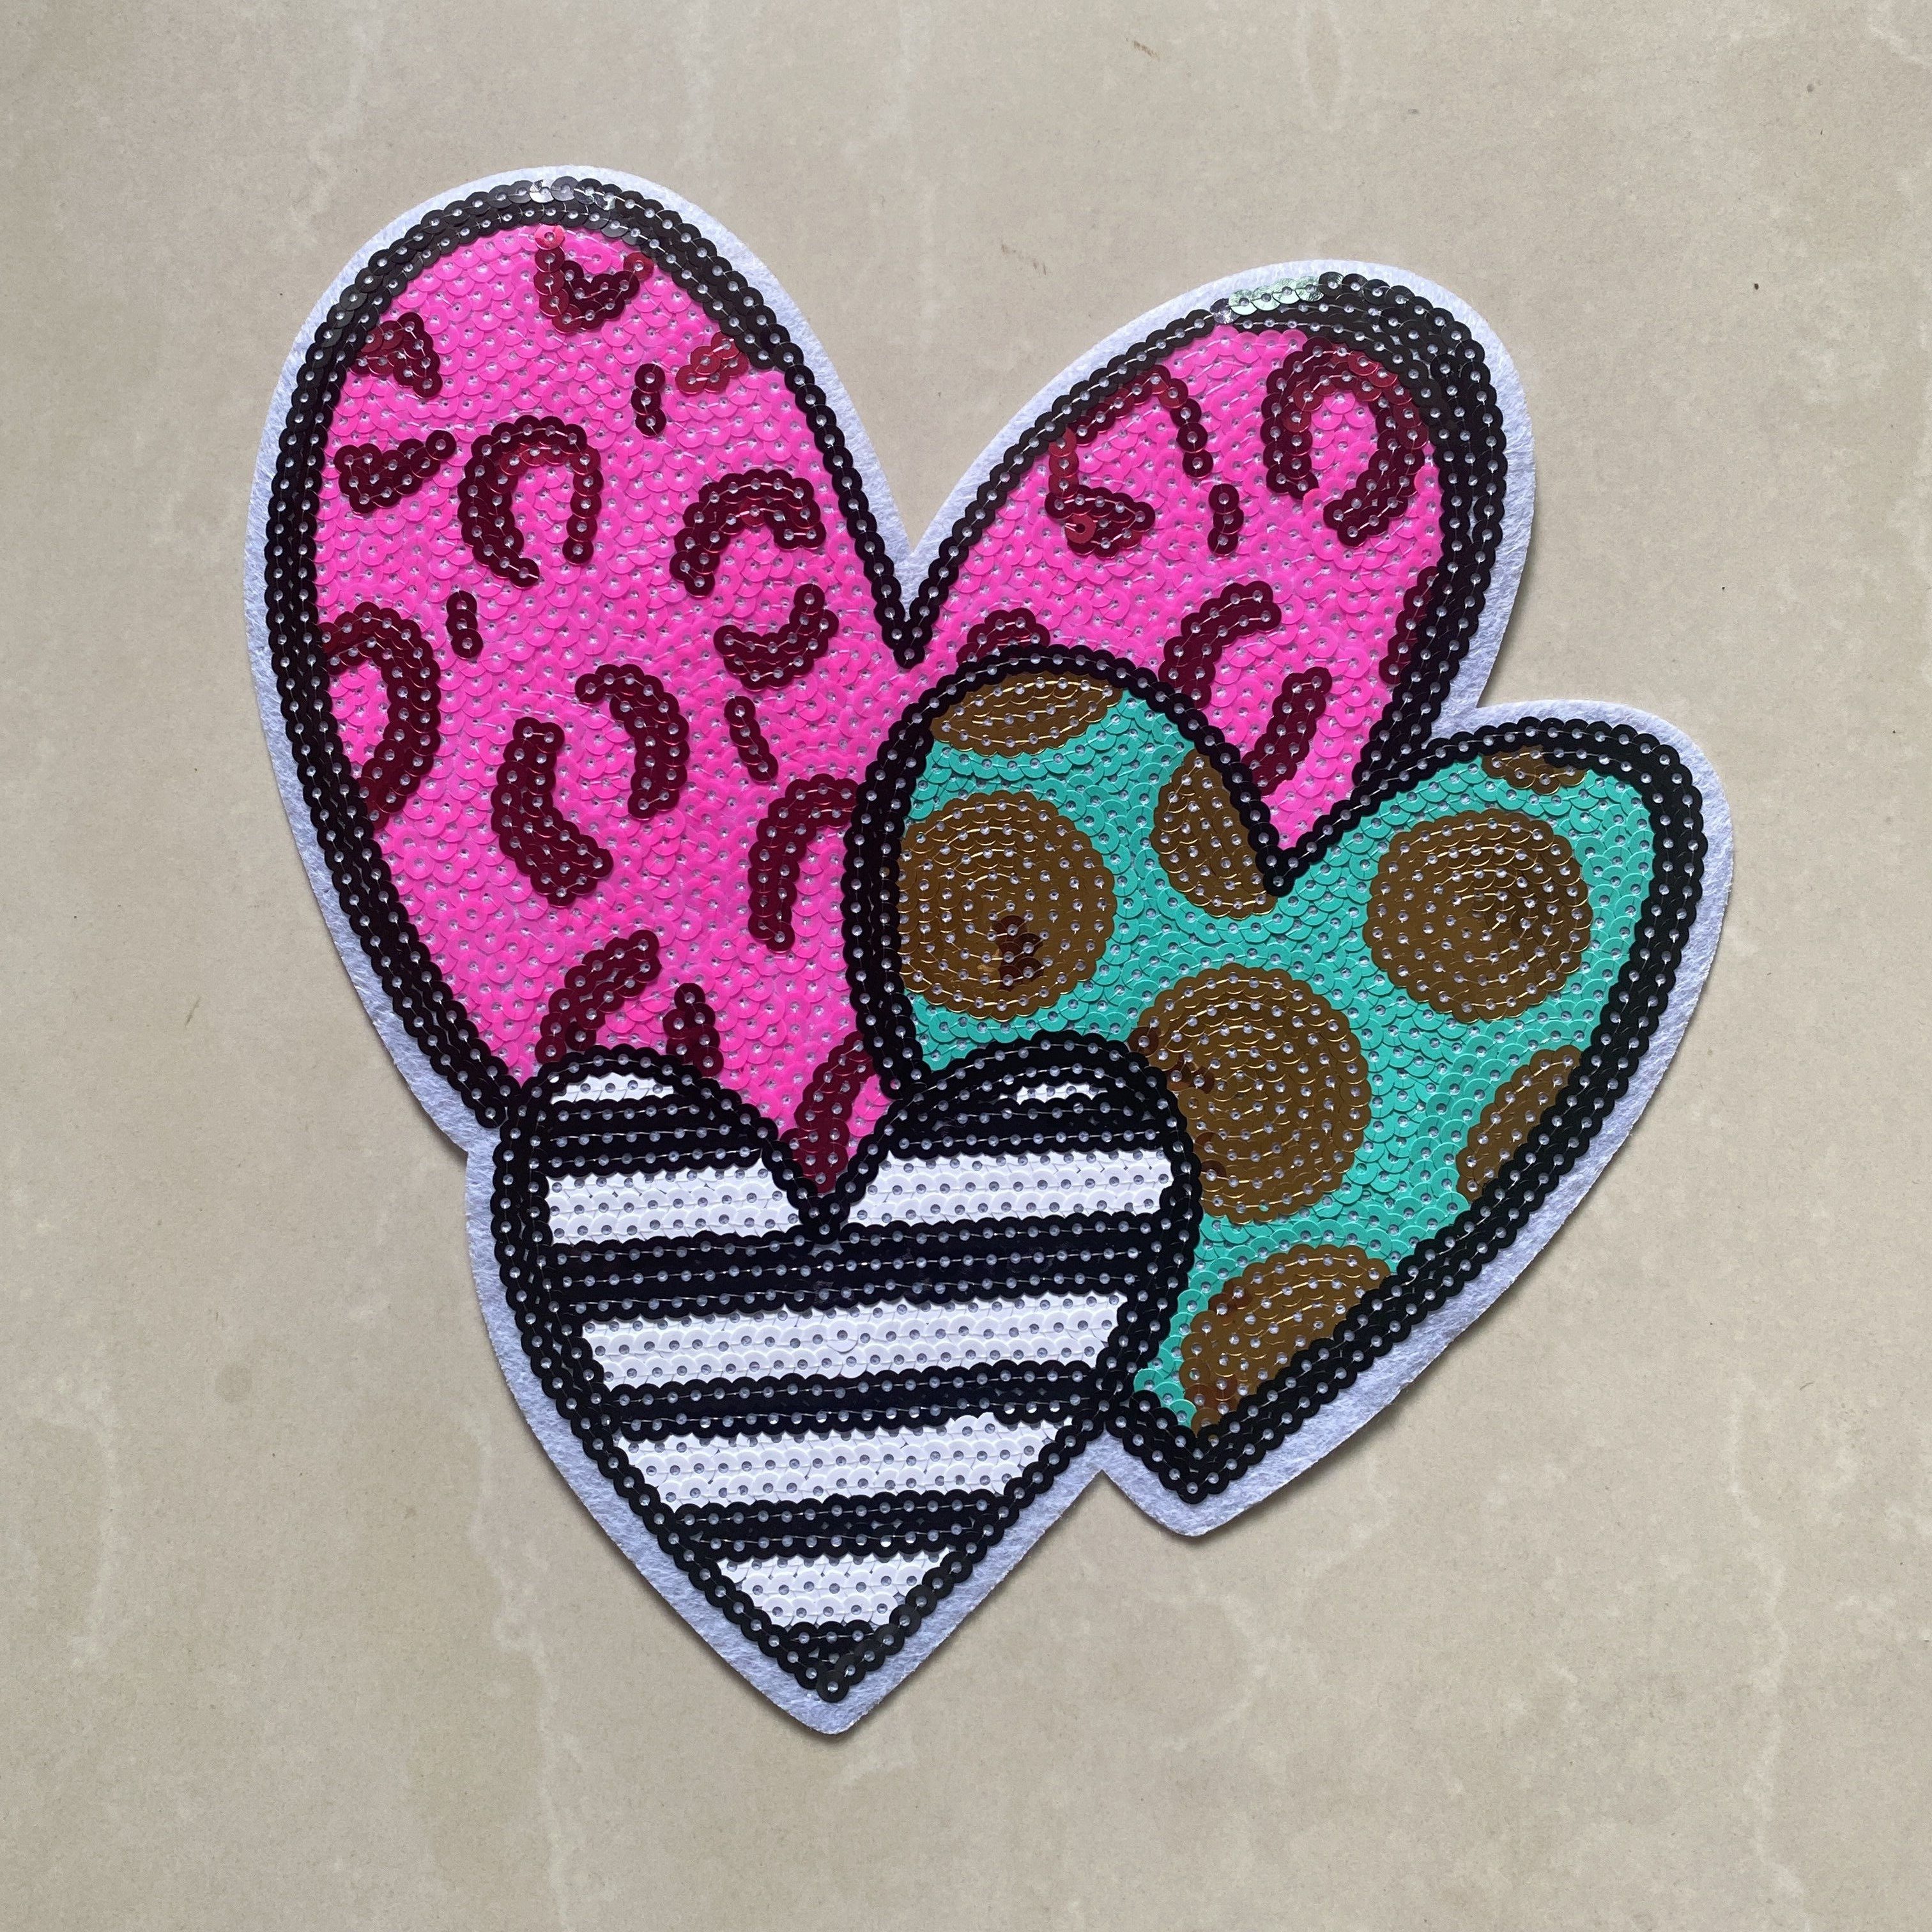 2 Sequin Heart Patches Iron on Patch Gold and Red Love Heart Applique 